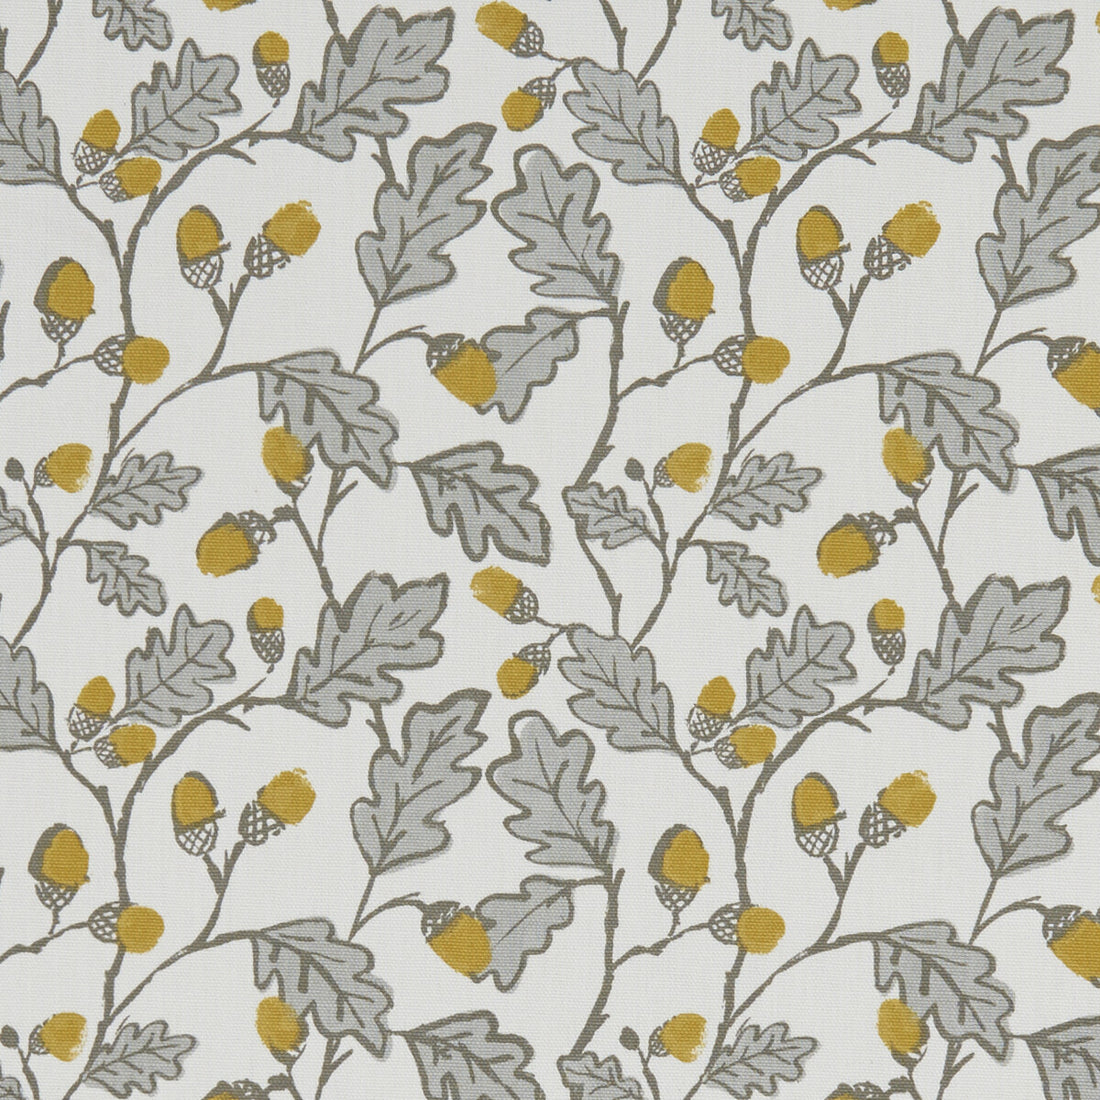 Acorn Trail fabric in natural color - pattern F1182/02.CAC.0 - by Clarke And Clarke in the Land &amp; Sea By Studio G For C&amp;C collection